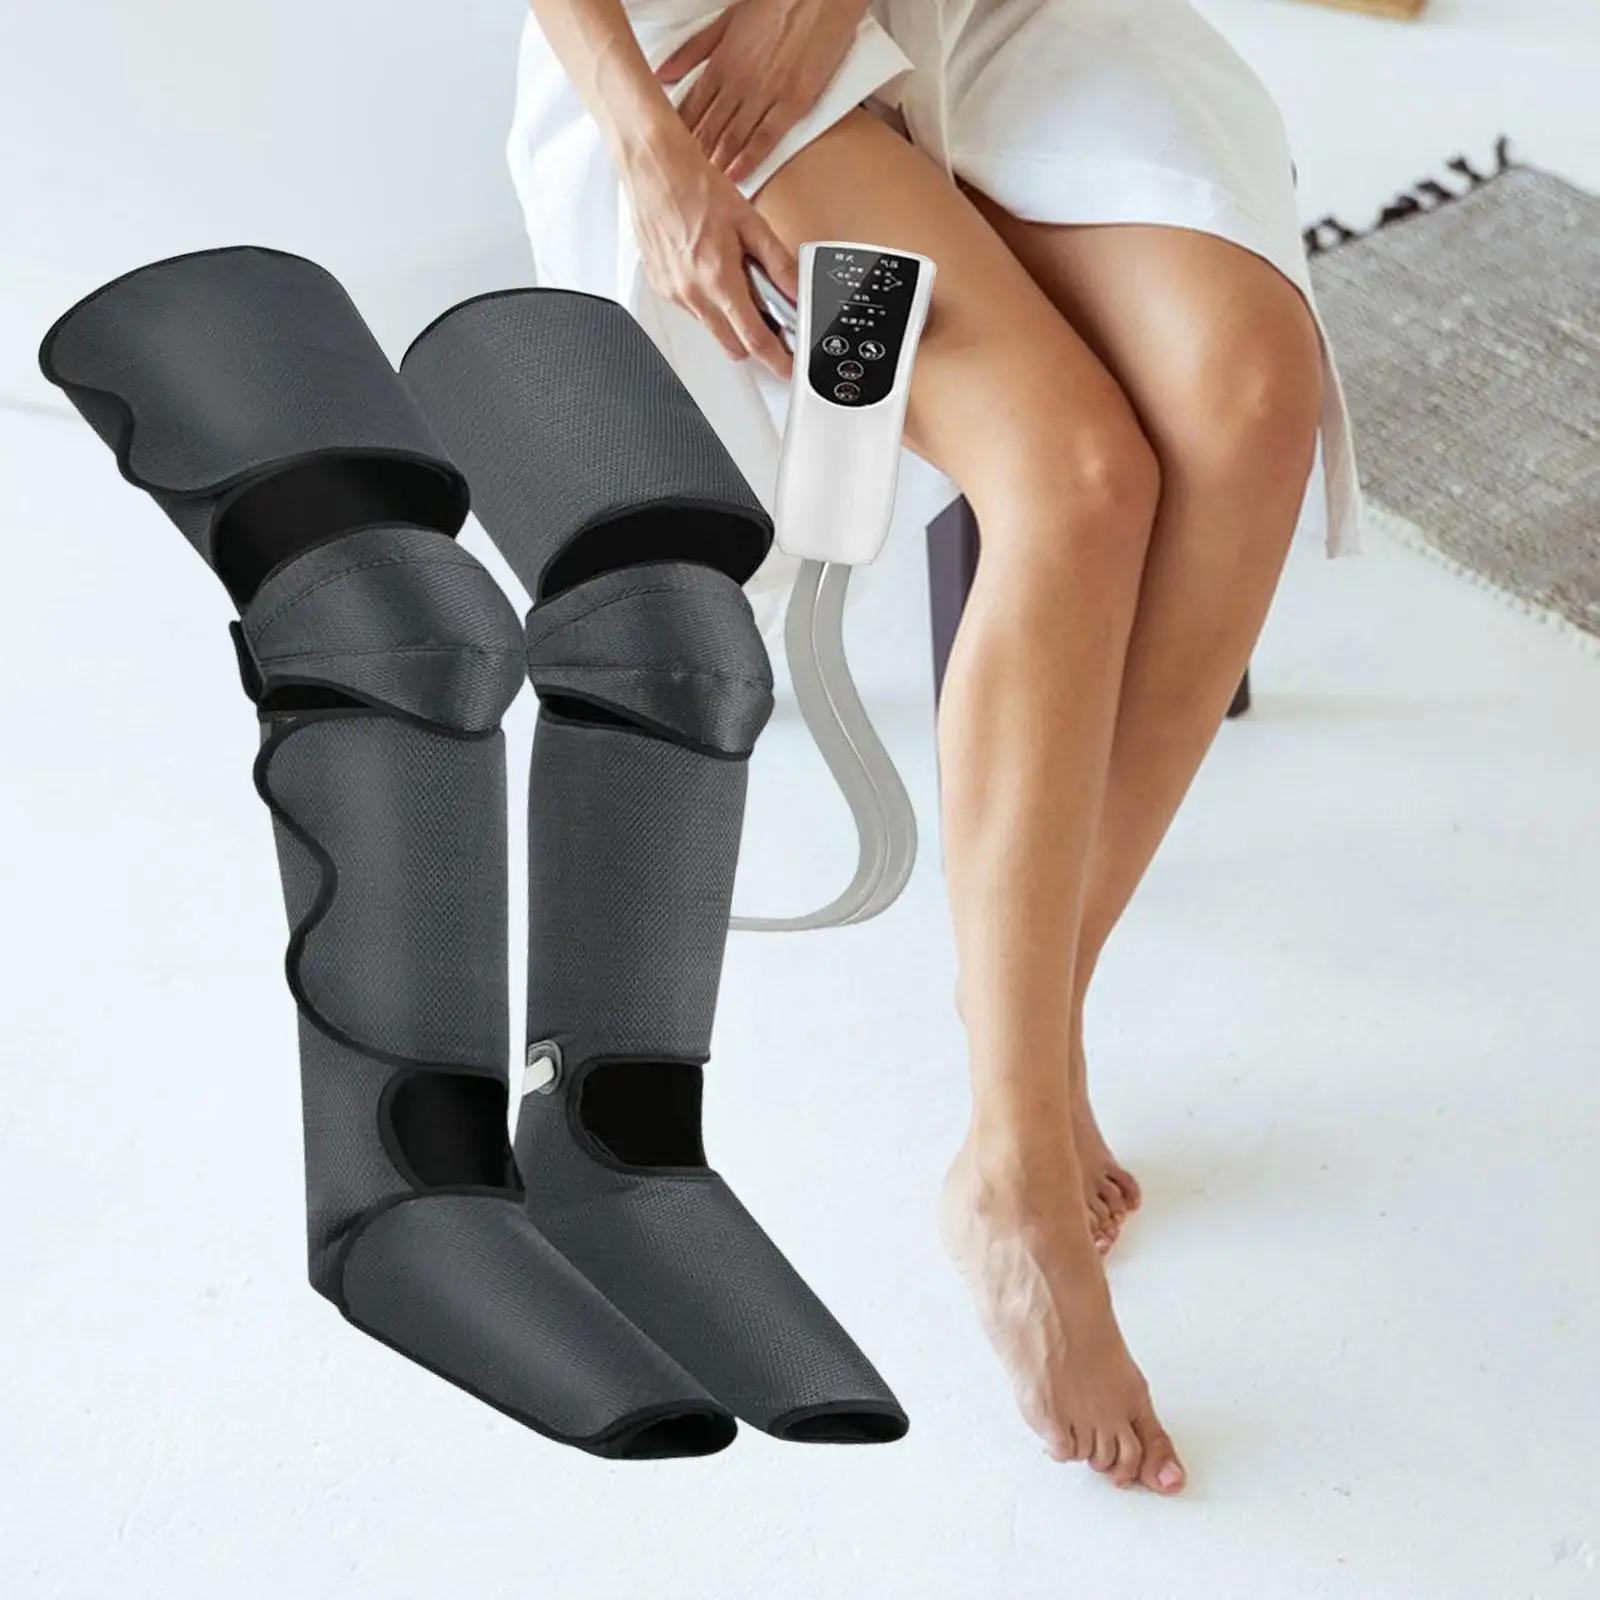 

360° Foot Air Pressure Leg Massager Promotes Blood Circulation, Body Massager, Muscle Relaxation, Lymphatic Drainage Device